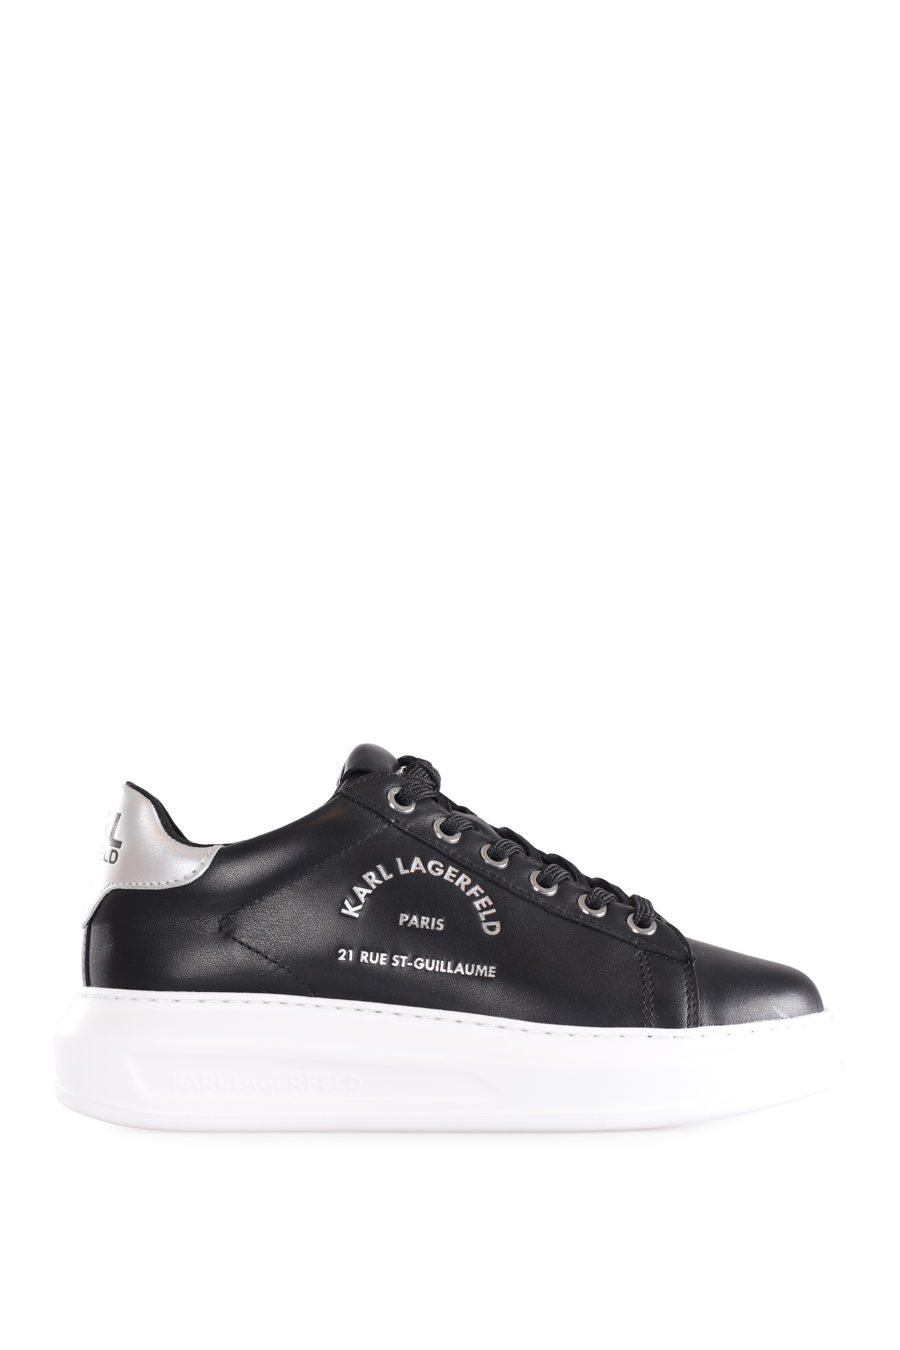 Black trainers with silver logo and platform - IMG 9566